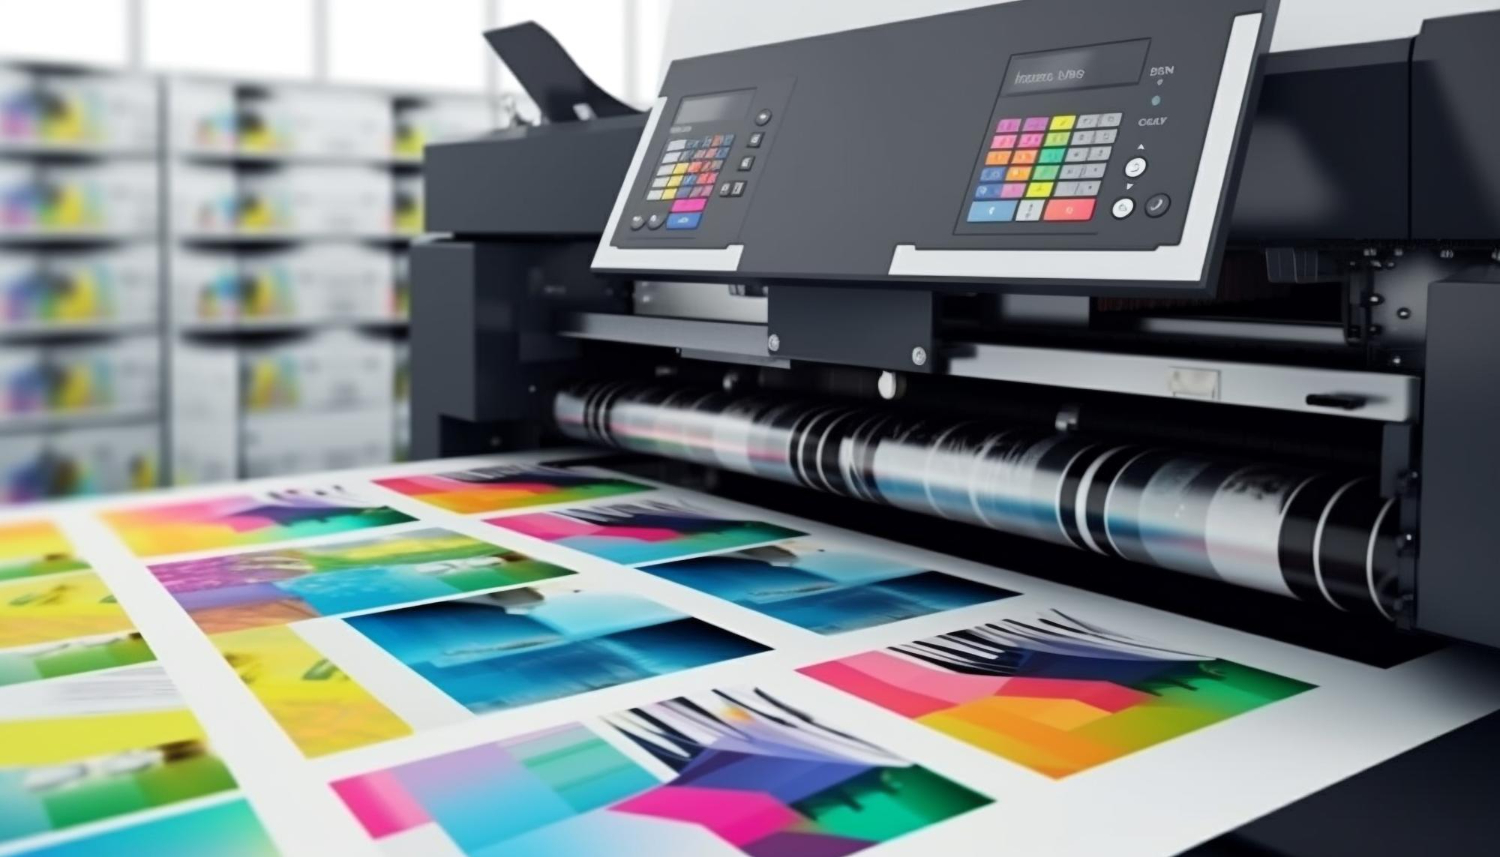 Role of Printers in Workplaces